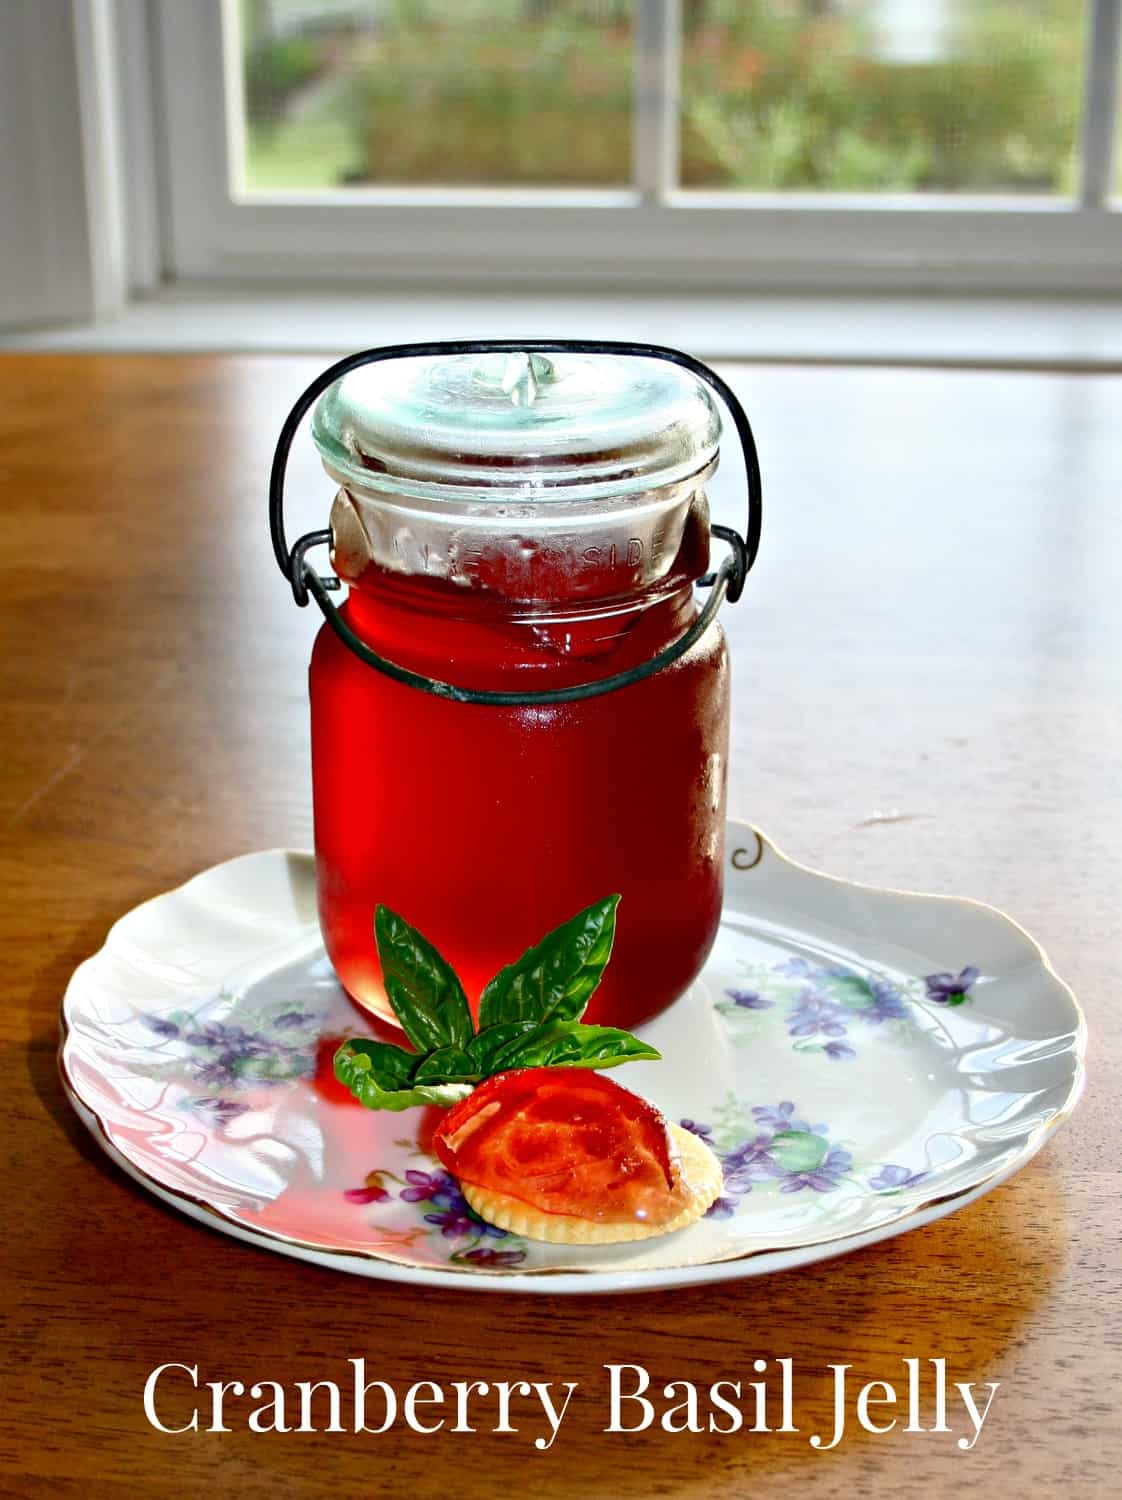 a jar of cranberry basil jelly on a plate with blue flowers and a cracker with jelly shaped like a strawberry